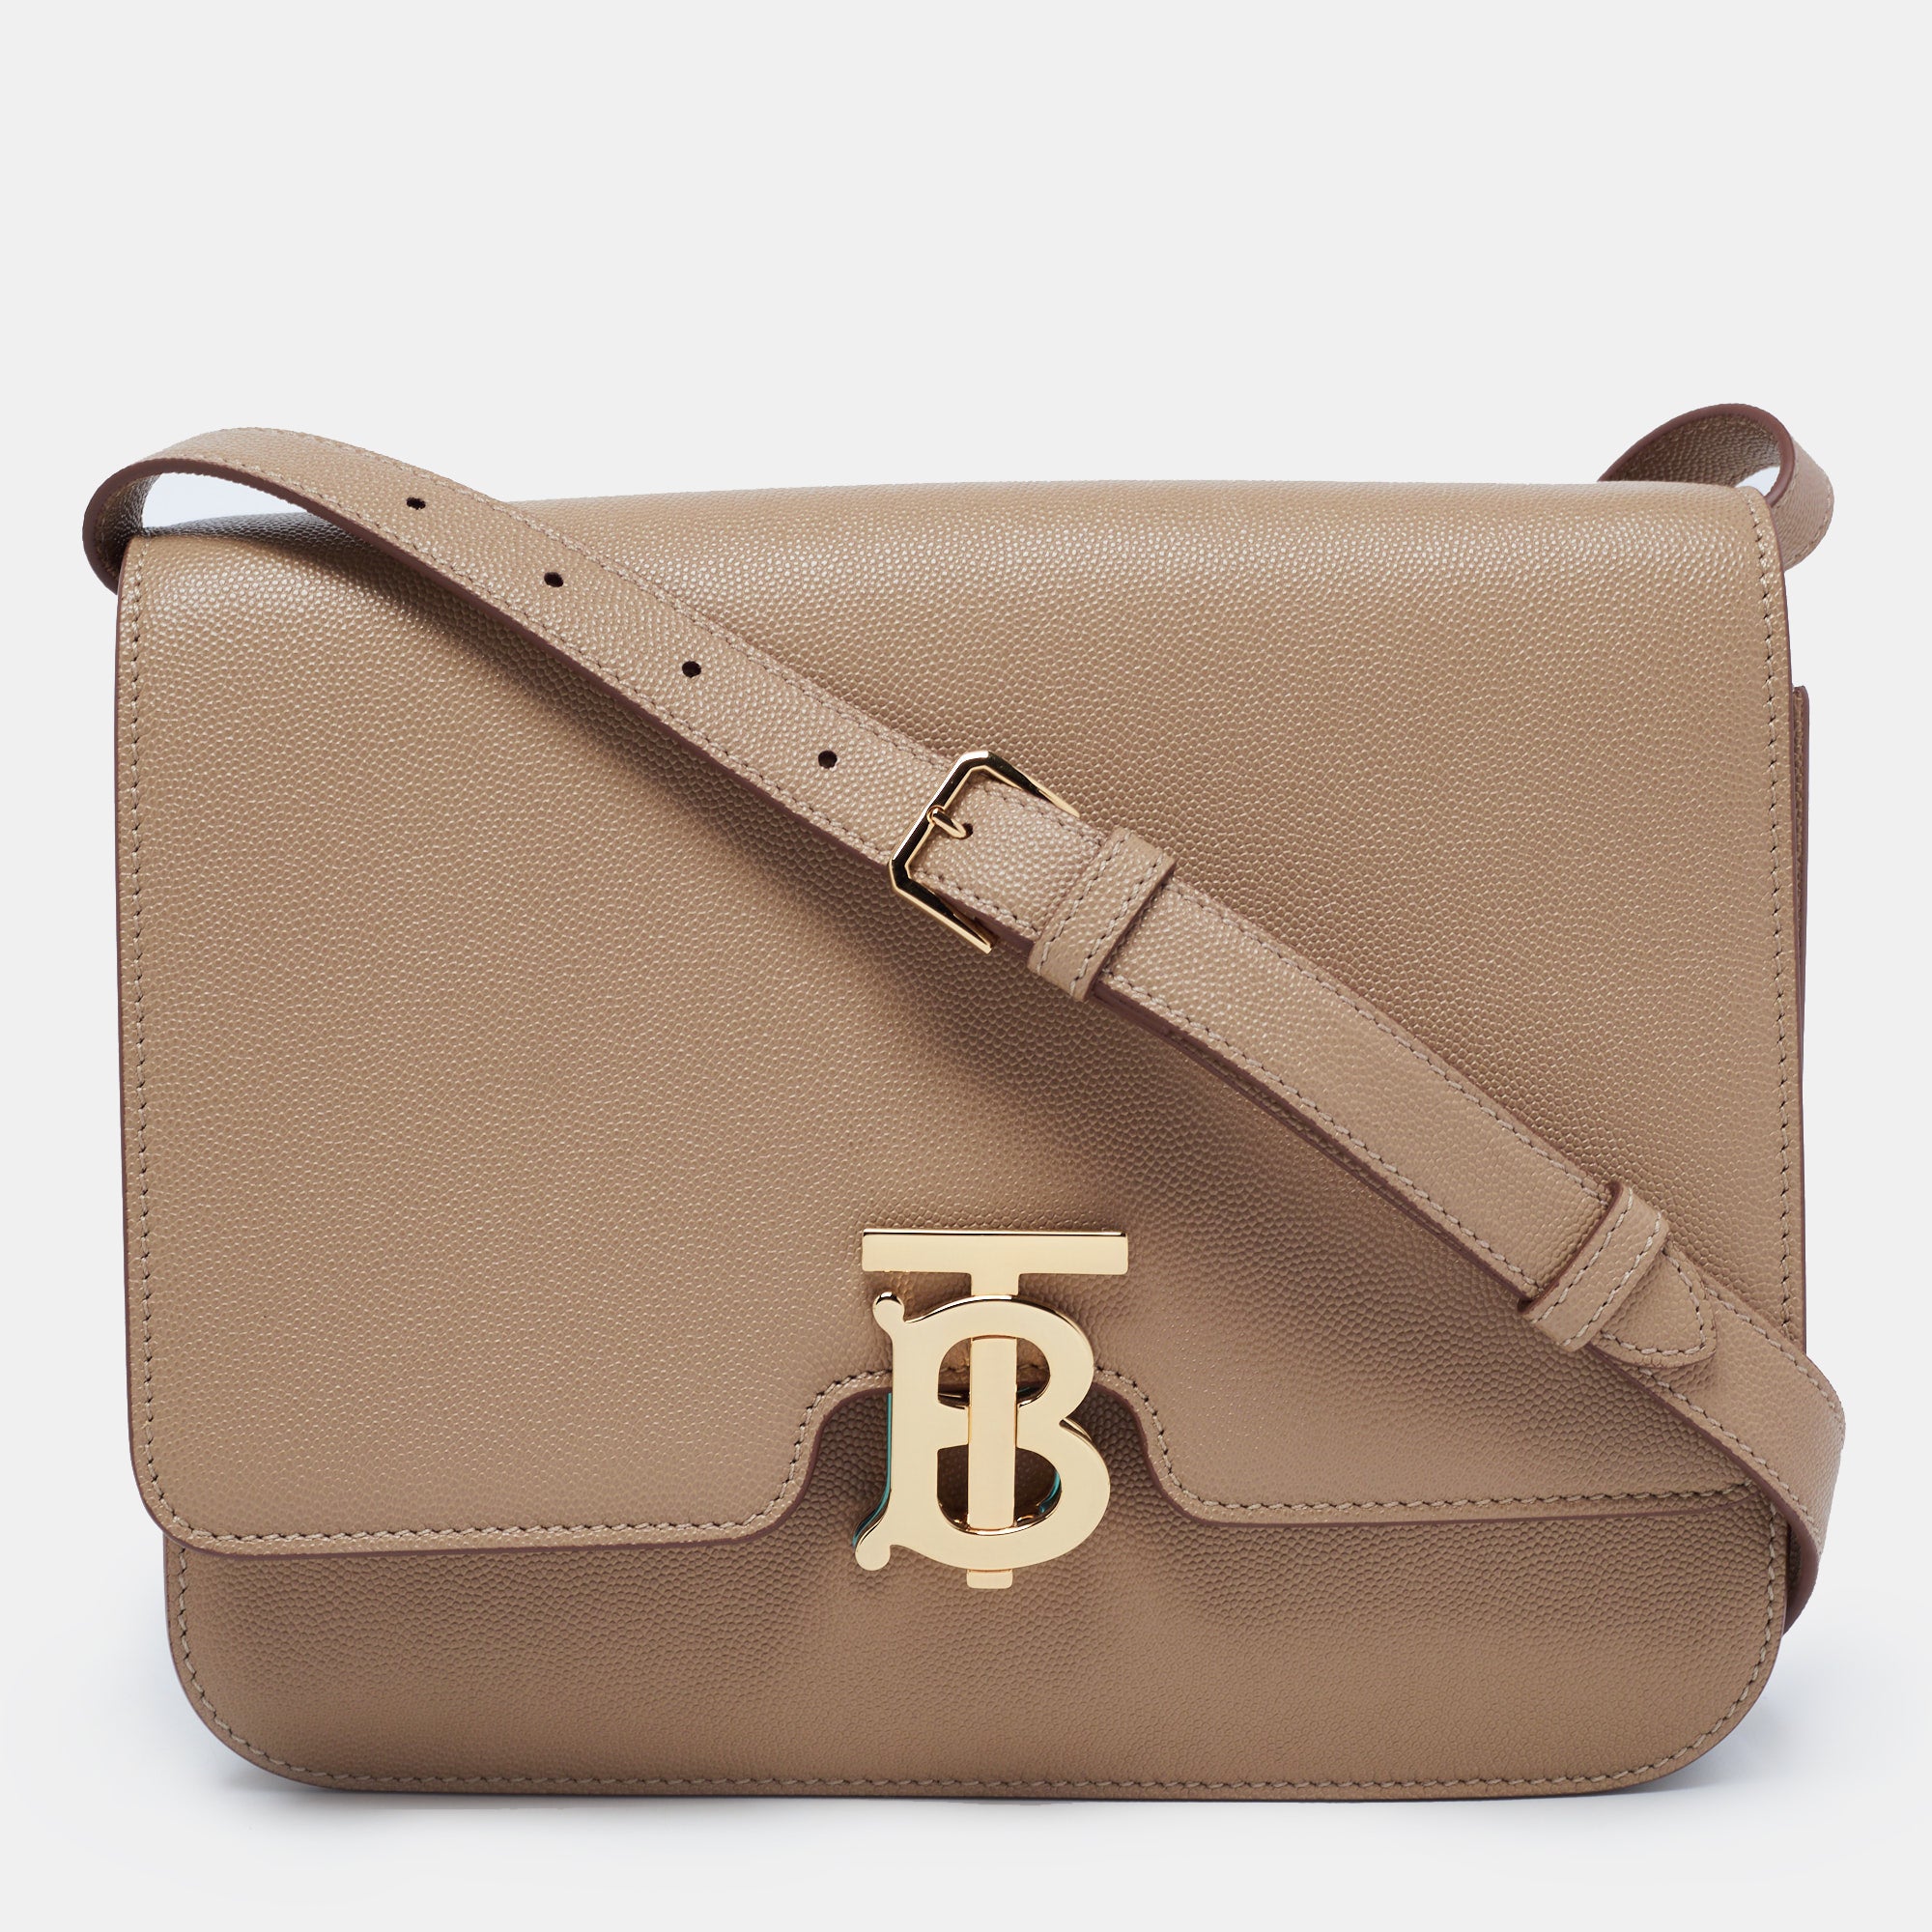 The barrel leather handbag Burberry Beige in Leather - 15586241